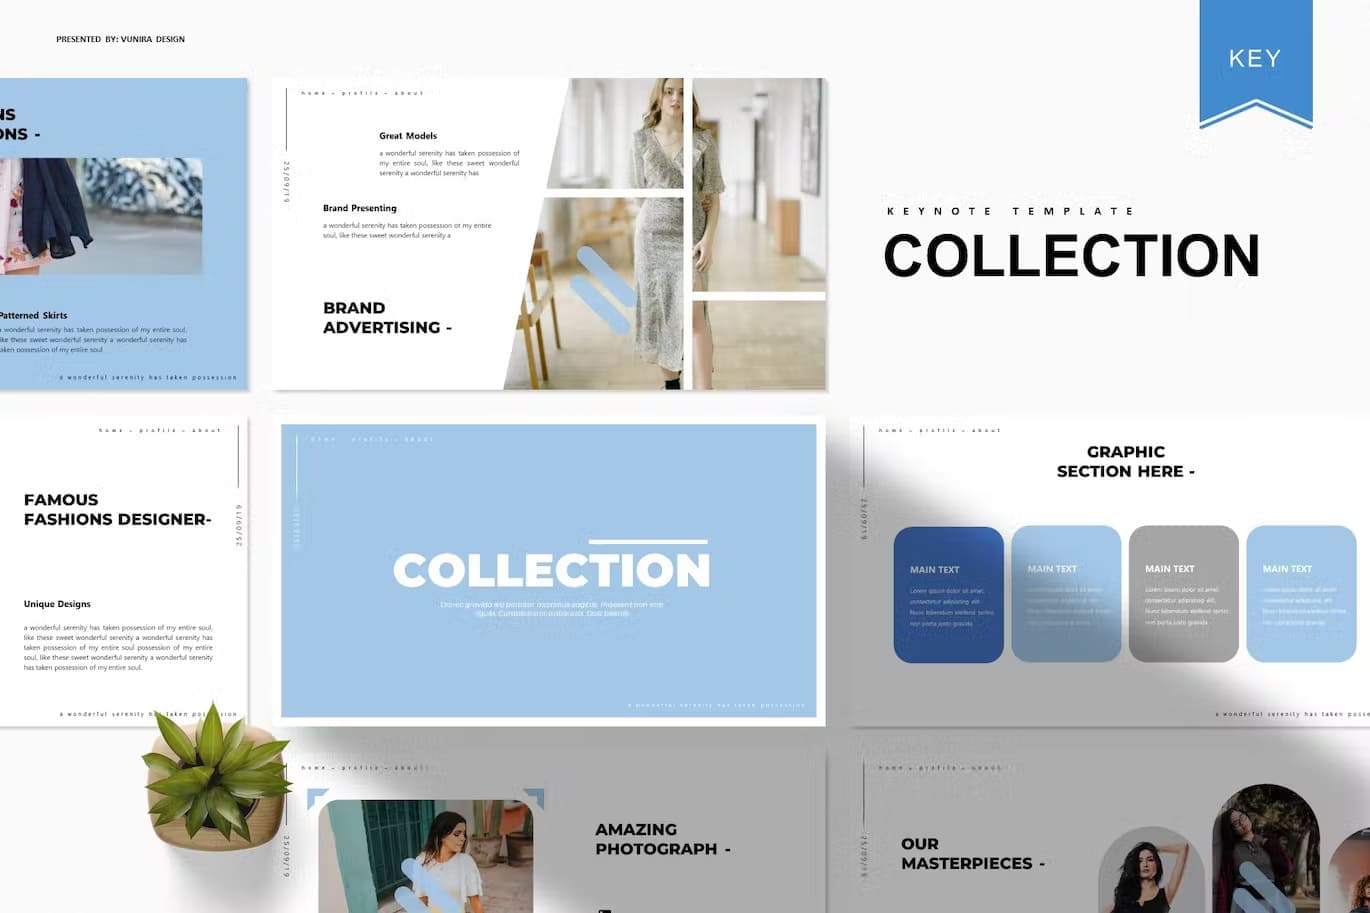 Collection keynote template, Brand advertising, Famous Fashions Designer.